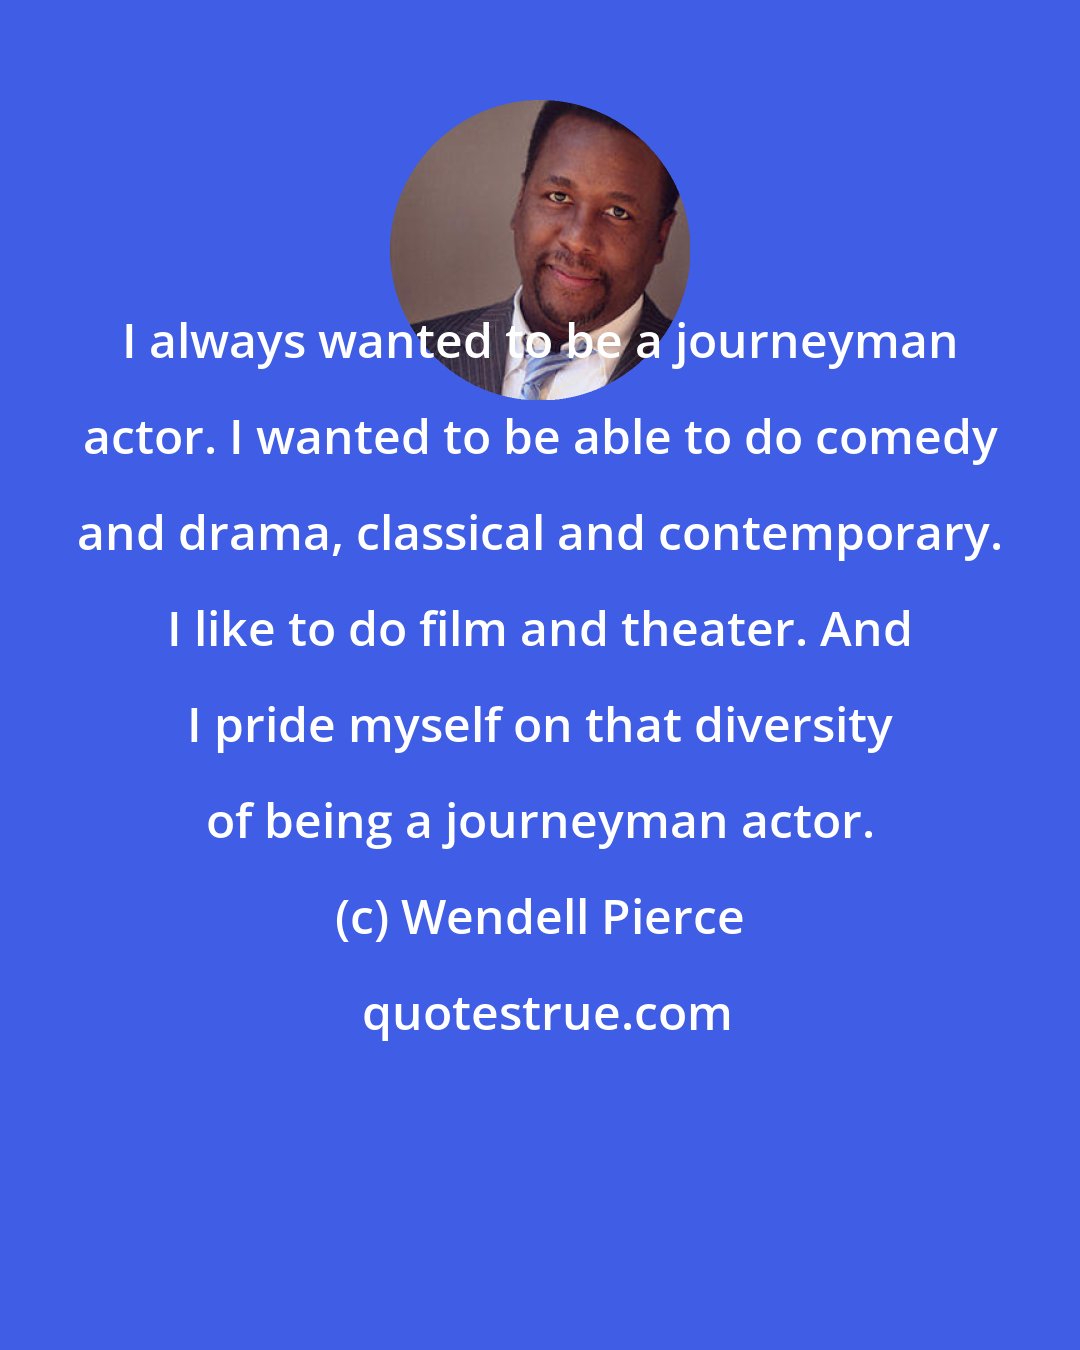 Wendell Pierce: I always wanted to be a journeyman actor. I wanted to be able to do comedy and drama, classical and contemporary. I like to do film and theater. And I pride myself on that diversity of being a journeyman actor.